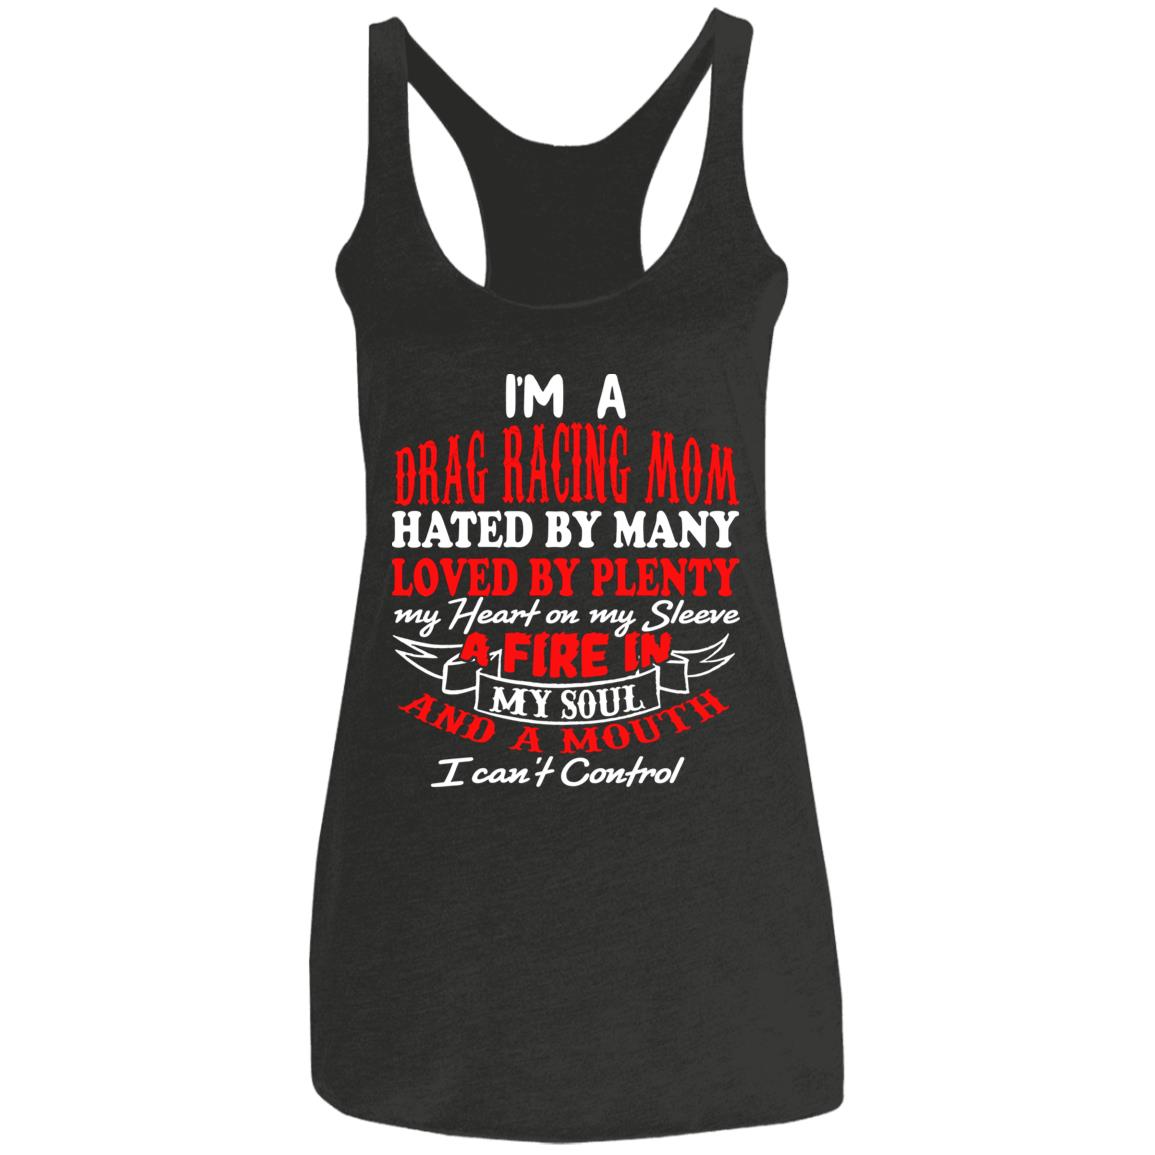 I'm A Drag Racing Mom Hated By Many Loved By Plenty Ladies' Triblend Racerback Tank